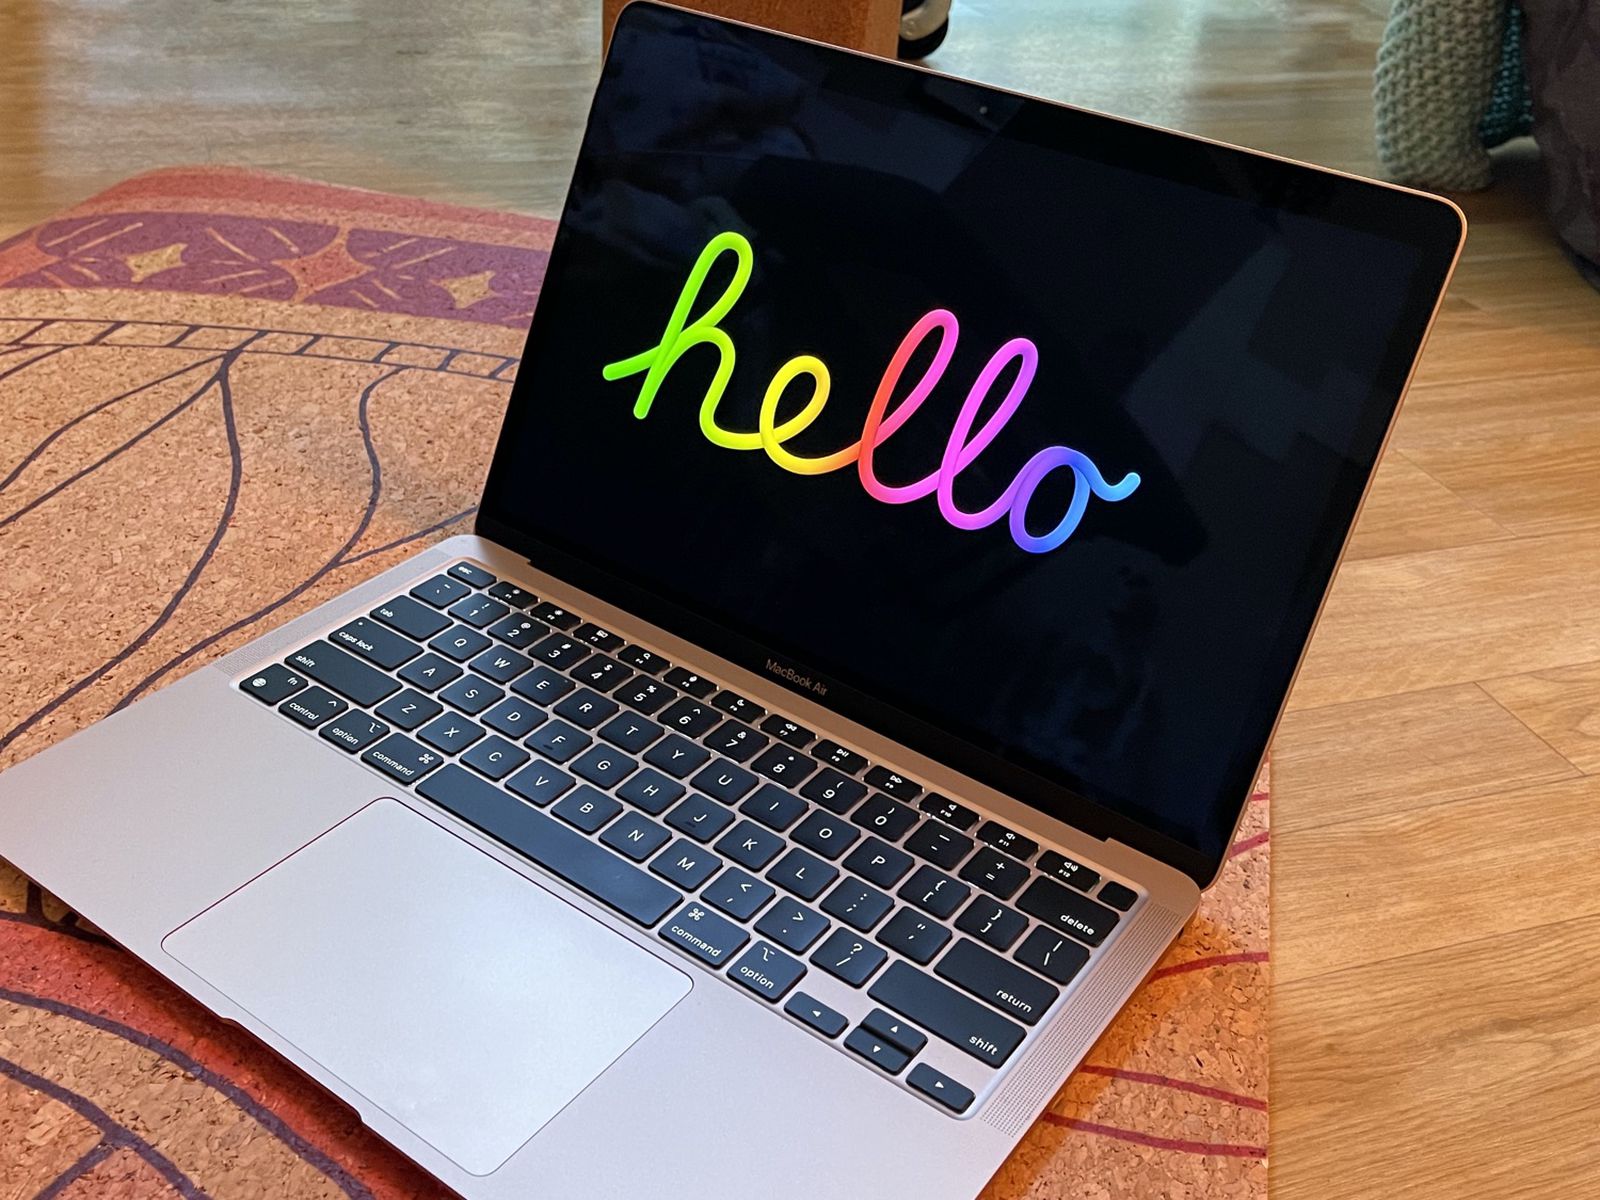 Apple Adds New 'Hello' Screen Saver in macOS Big Sur 11.3